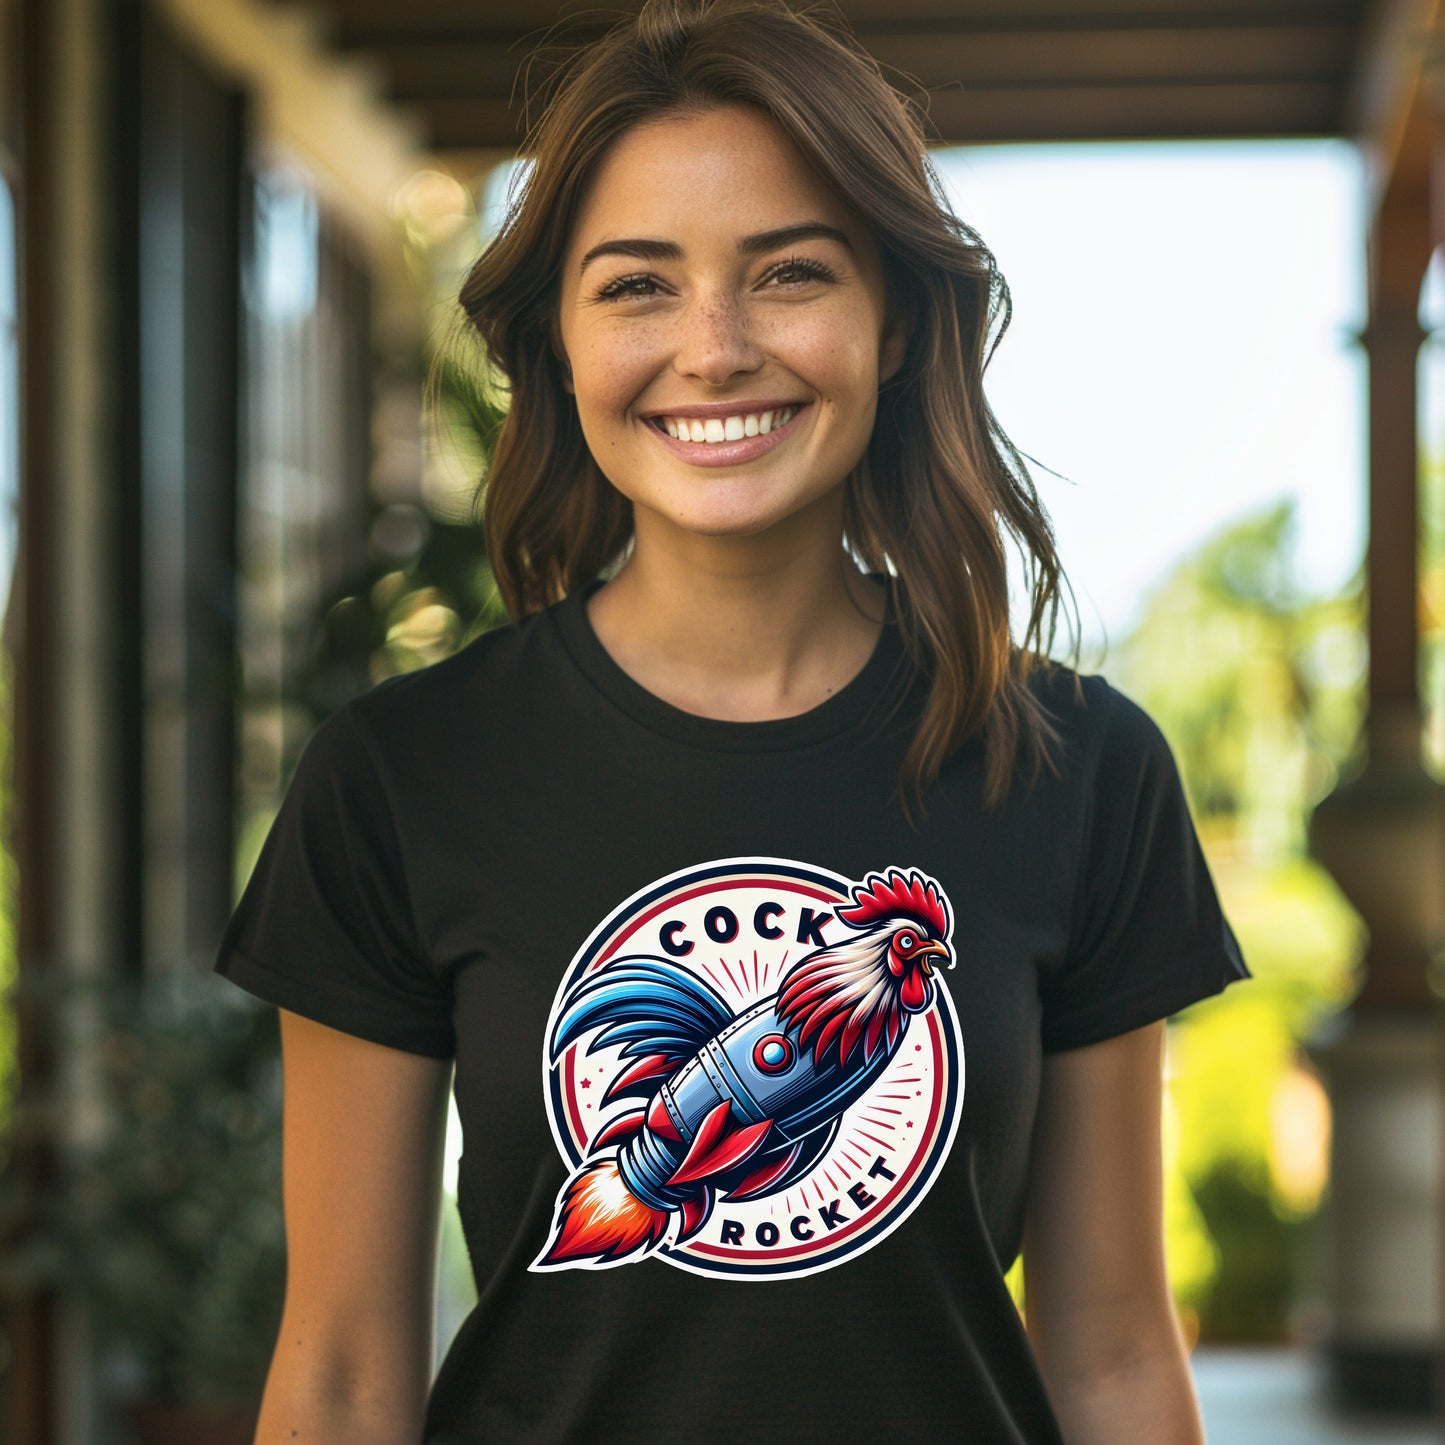 Patriotic Rooster Rocket T-Shirt in Red, White, and Blue - Independence Day Rooster T-Shirt, Red, White and Blue Space Rooster T-Shirt Gift